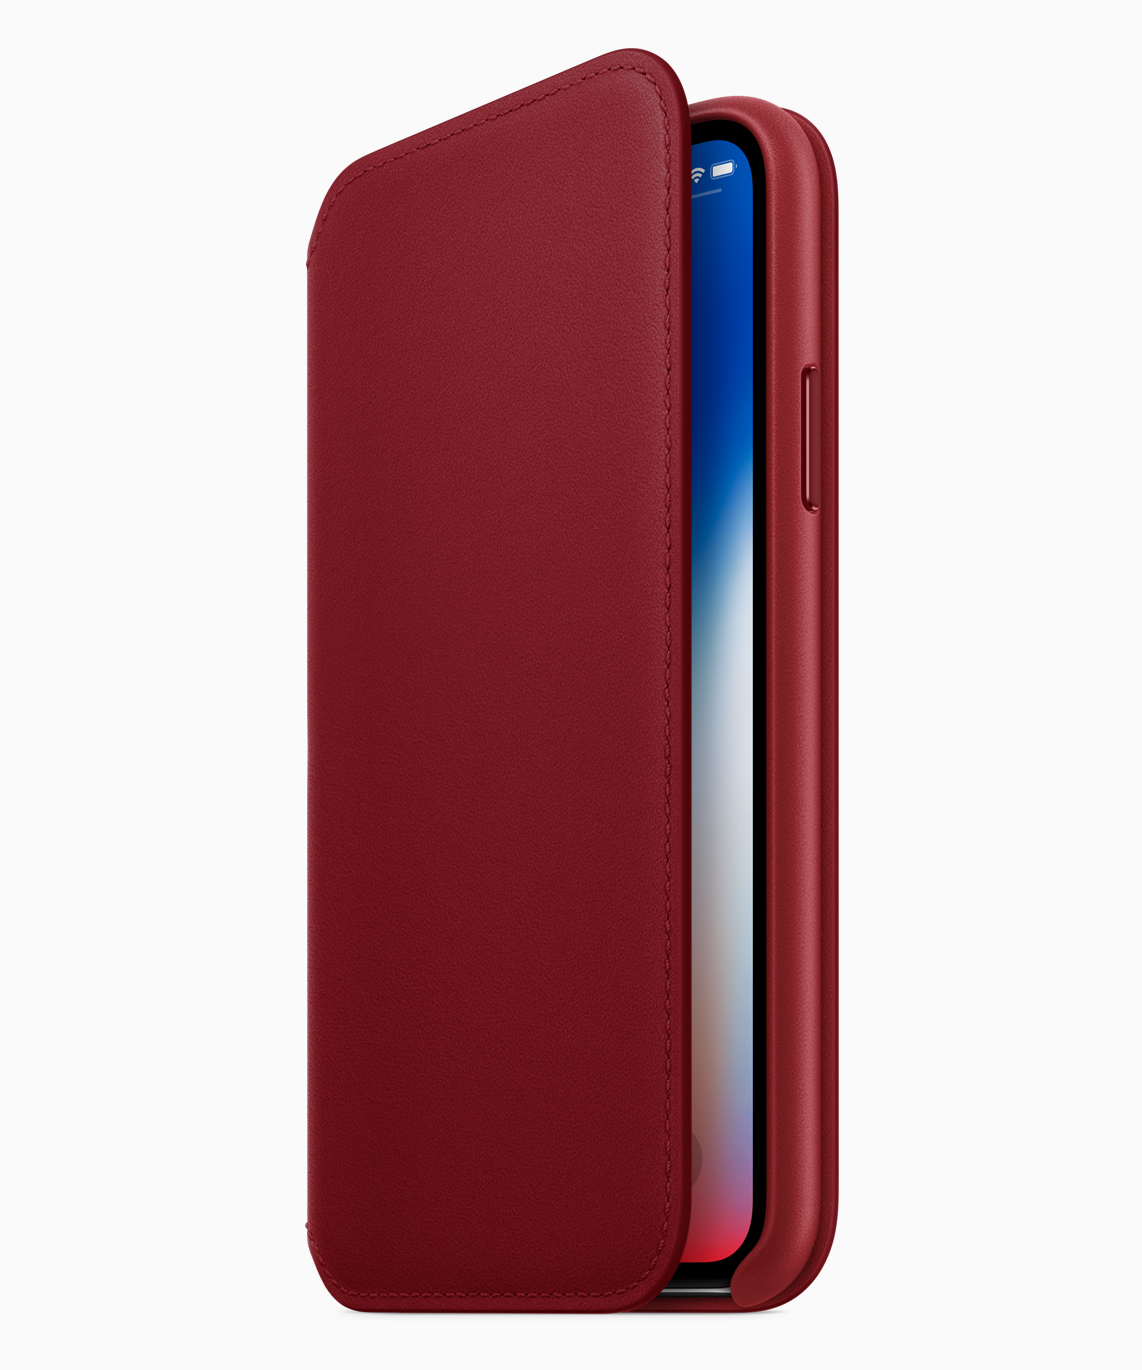 Apple Announces Special Edition (PRODUCT)RED iPhone 8 and iPhone 8 Plus